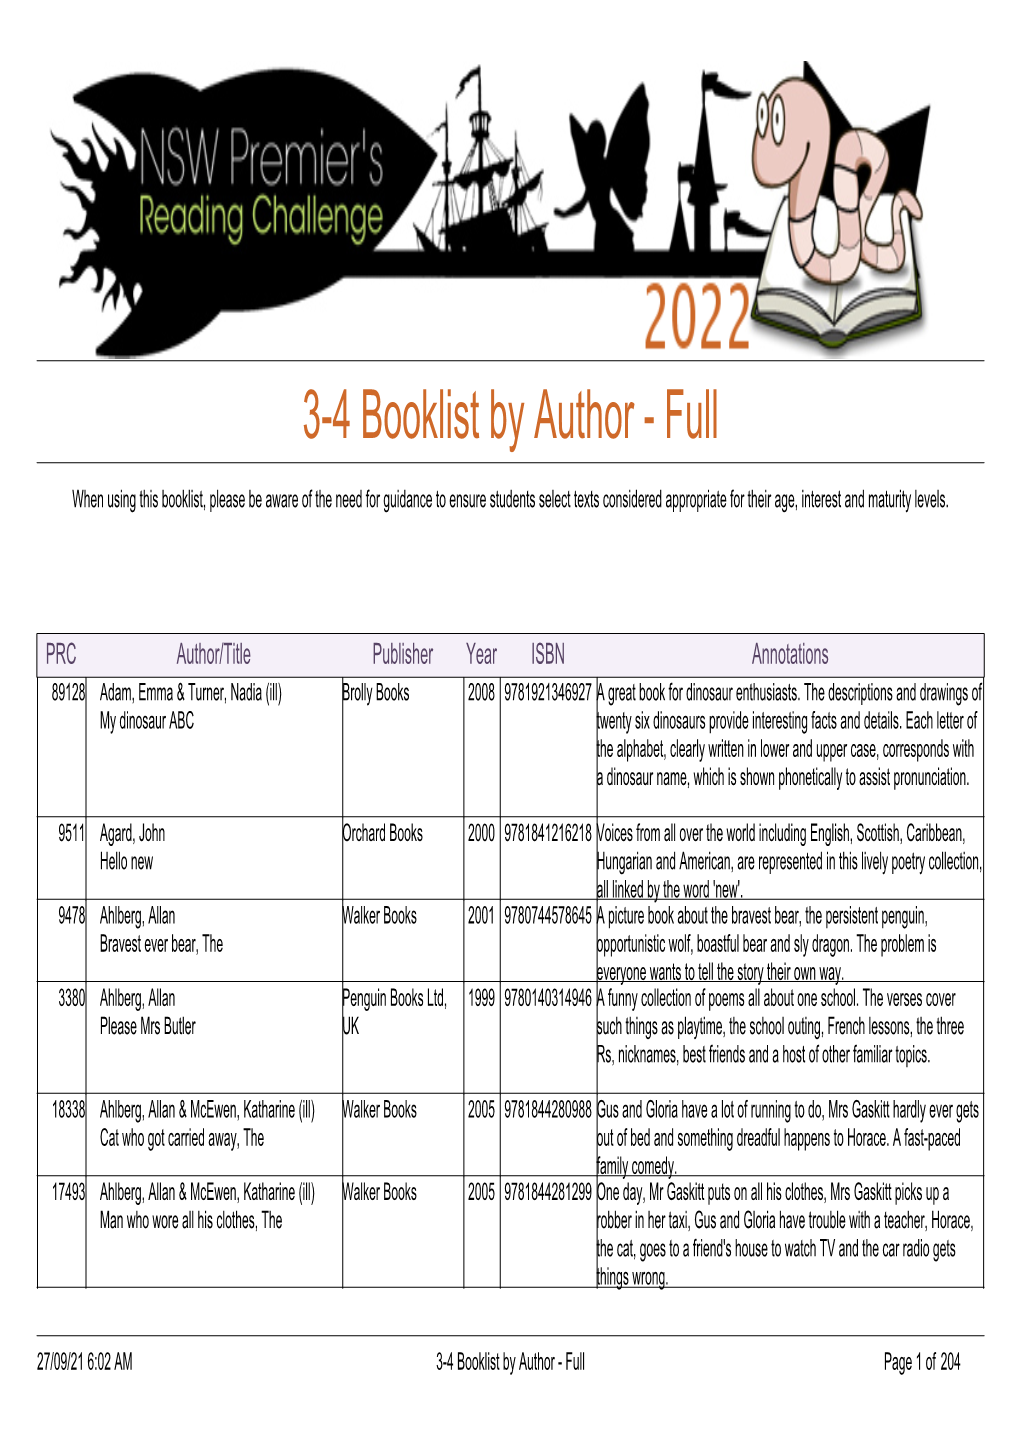 3-4 Booklist by Author - Full